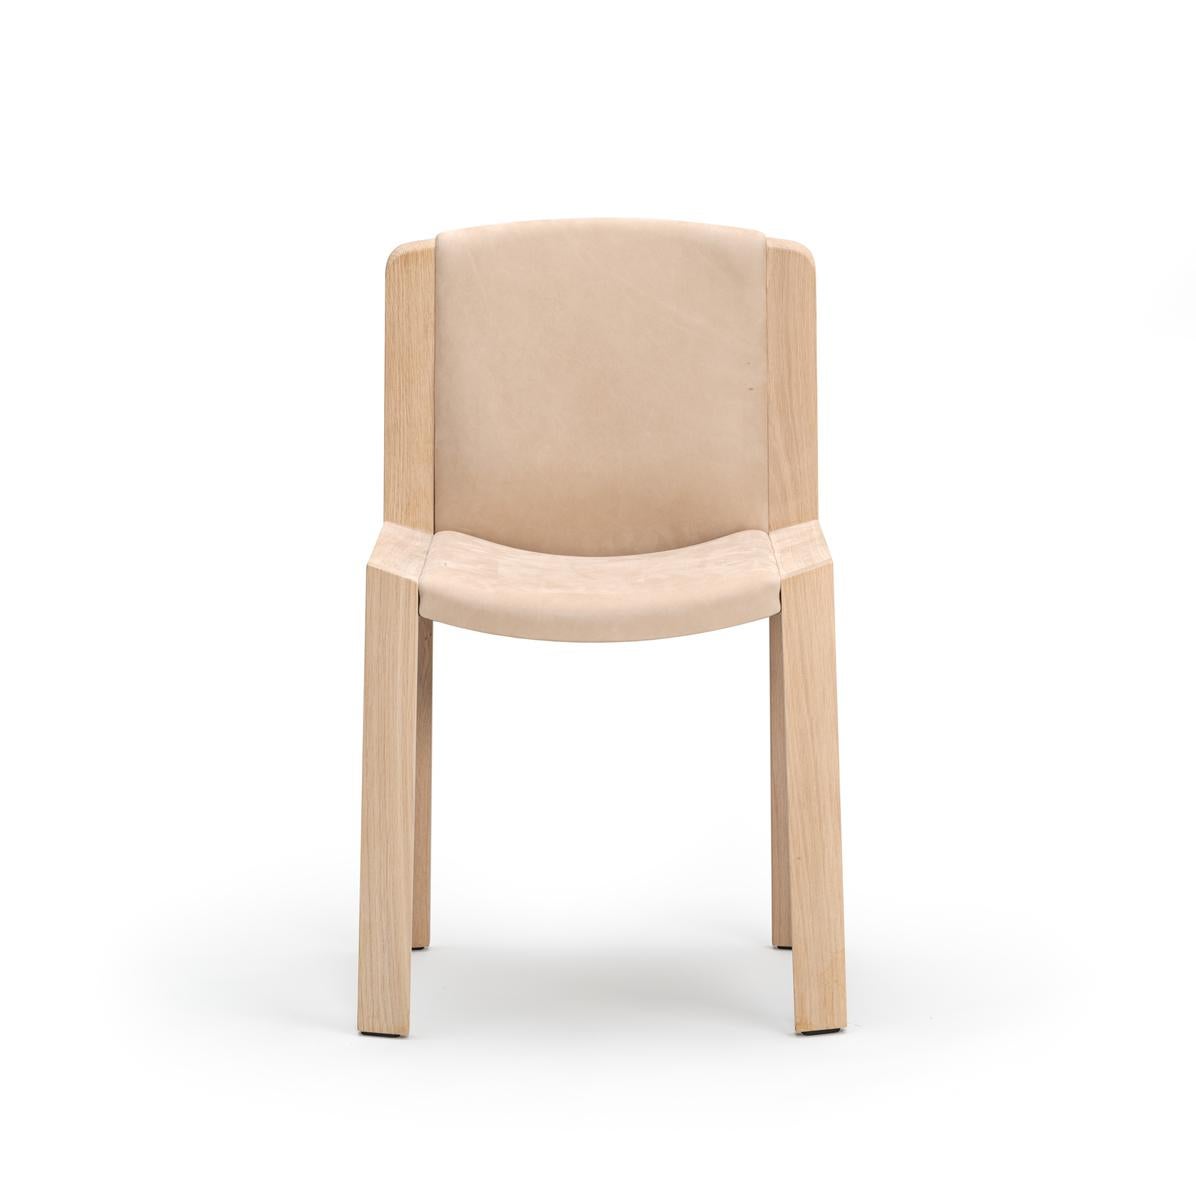 Joe Colombo 'Chair 300' Wood and Sørensen Leather Chair by Karakter 8